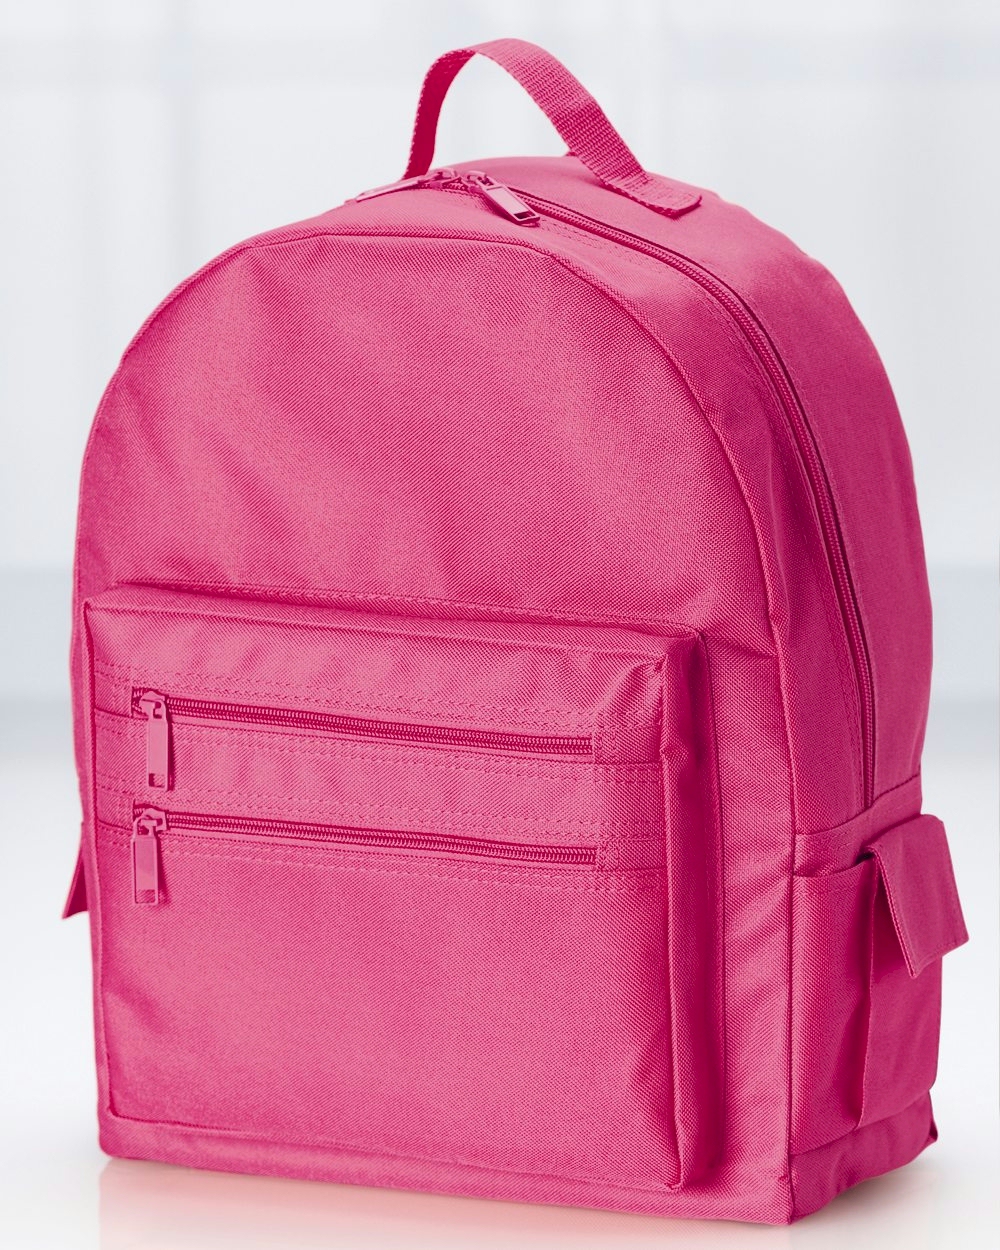 Eco-Friendly 16" Backpack Embroidery Blanks - HOT PINK